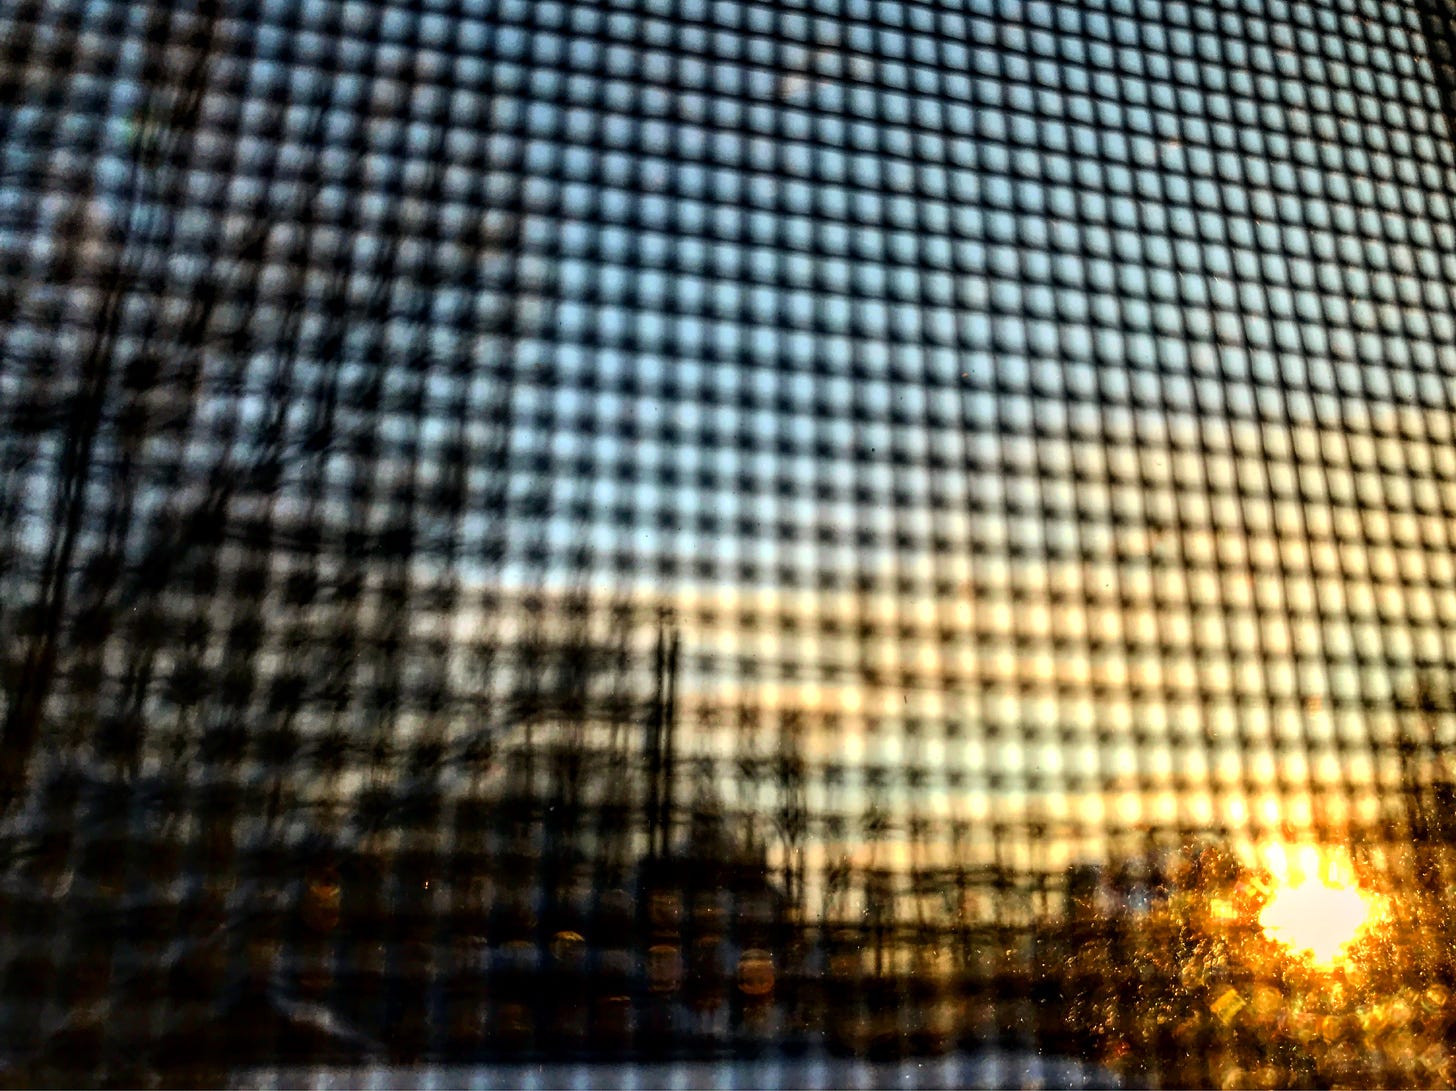 An unfocused close-up of a windowscreen with a sunrise in the blurry background